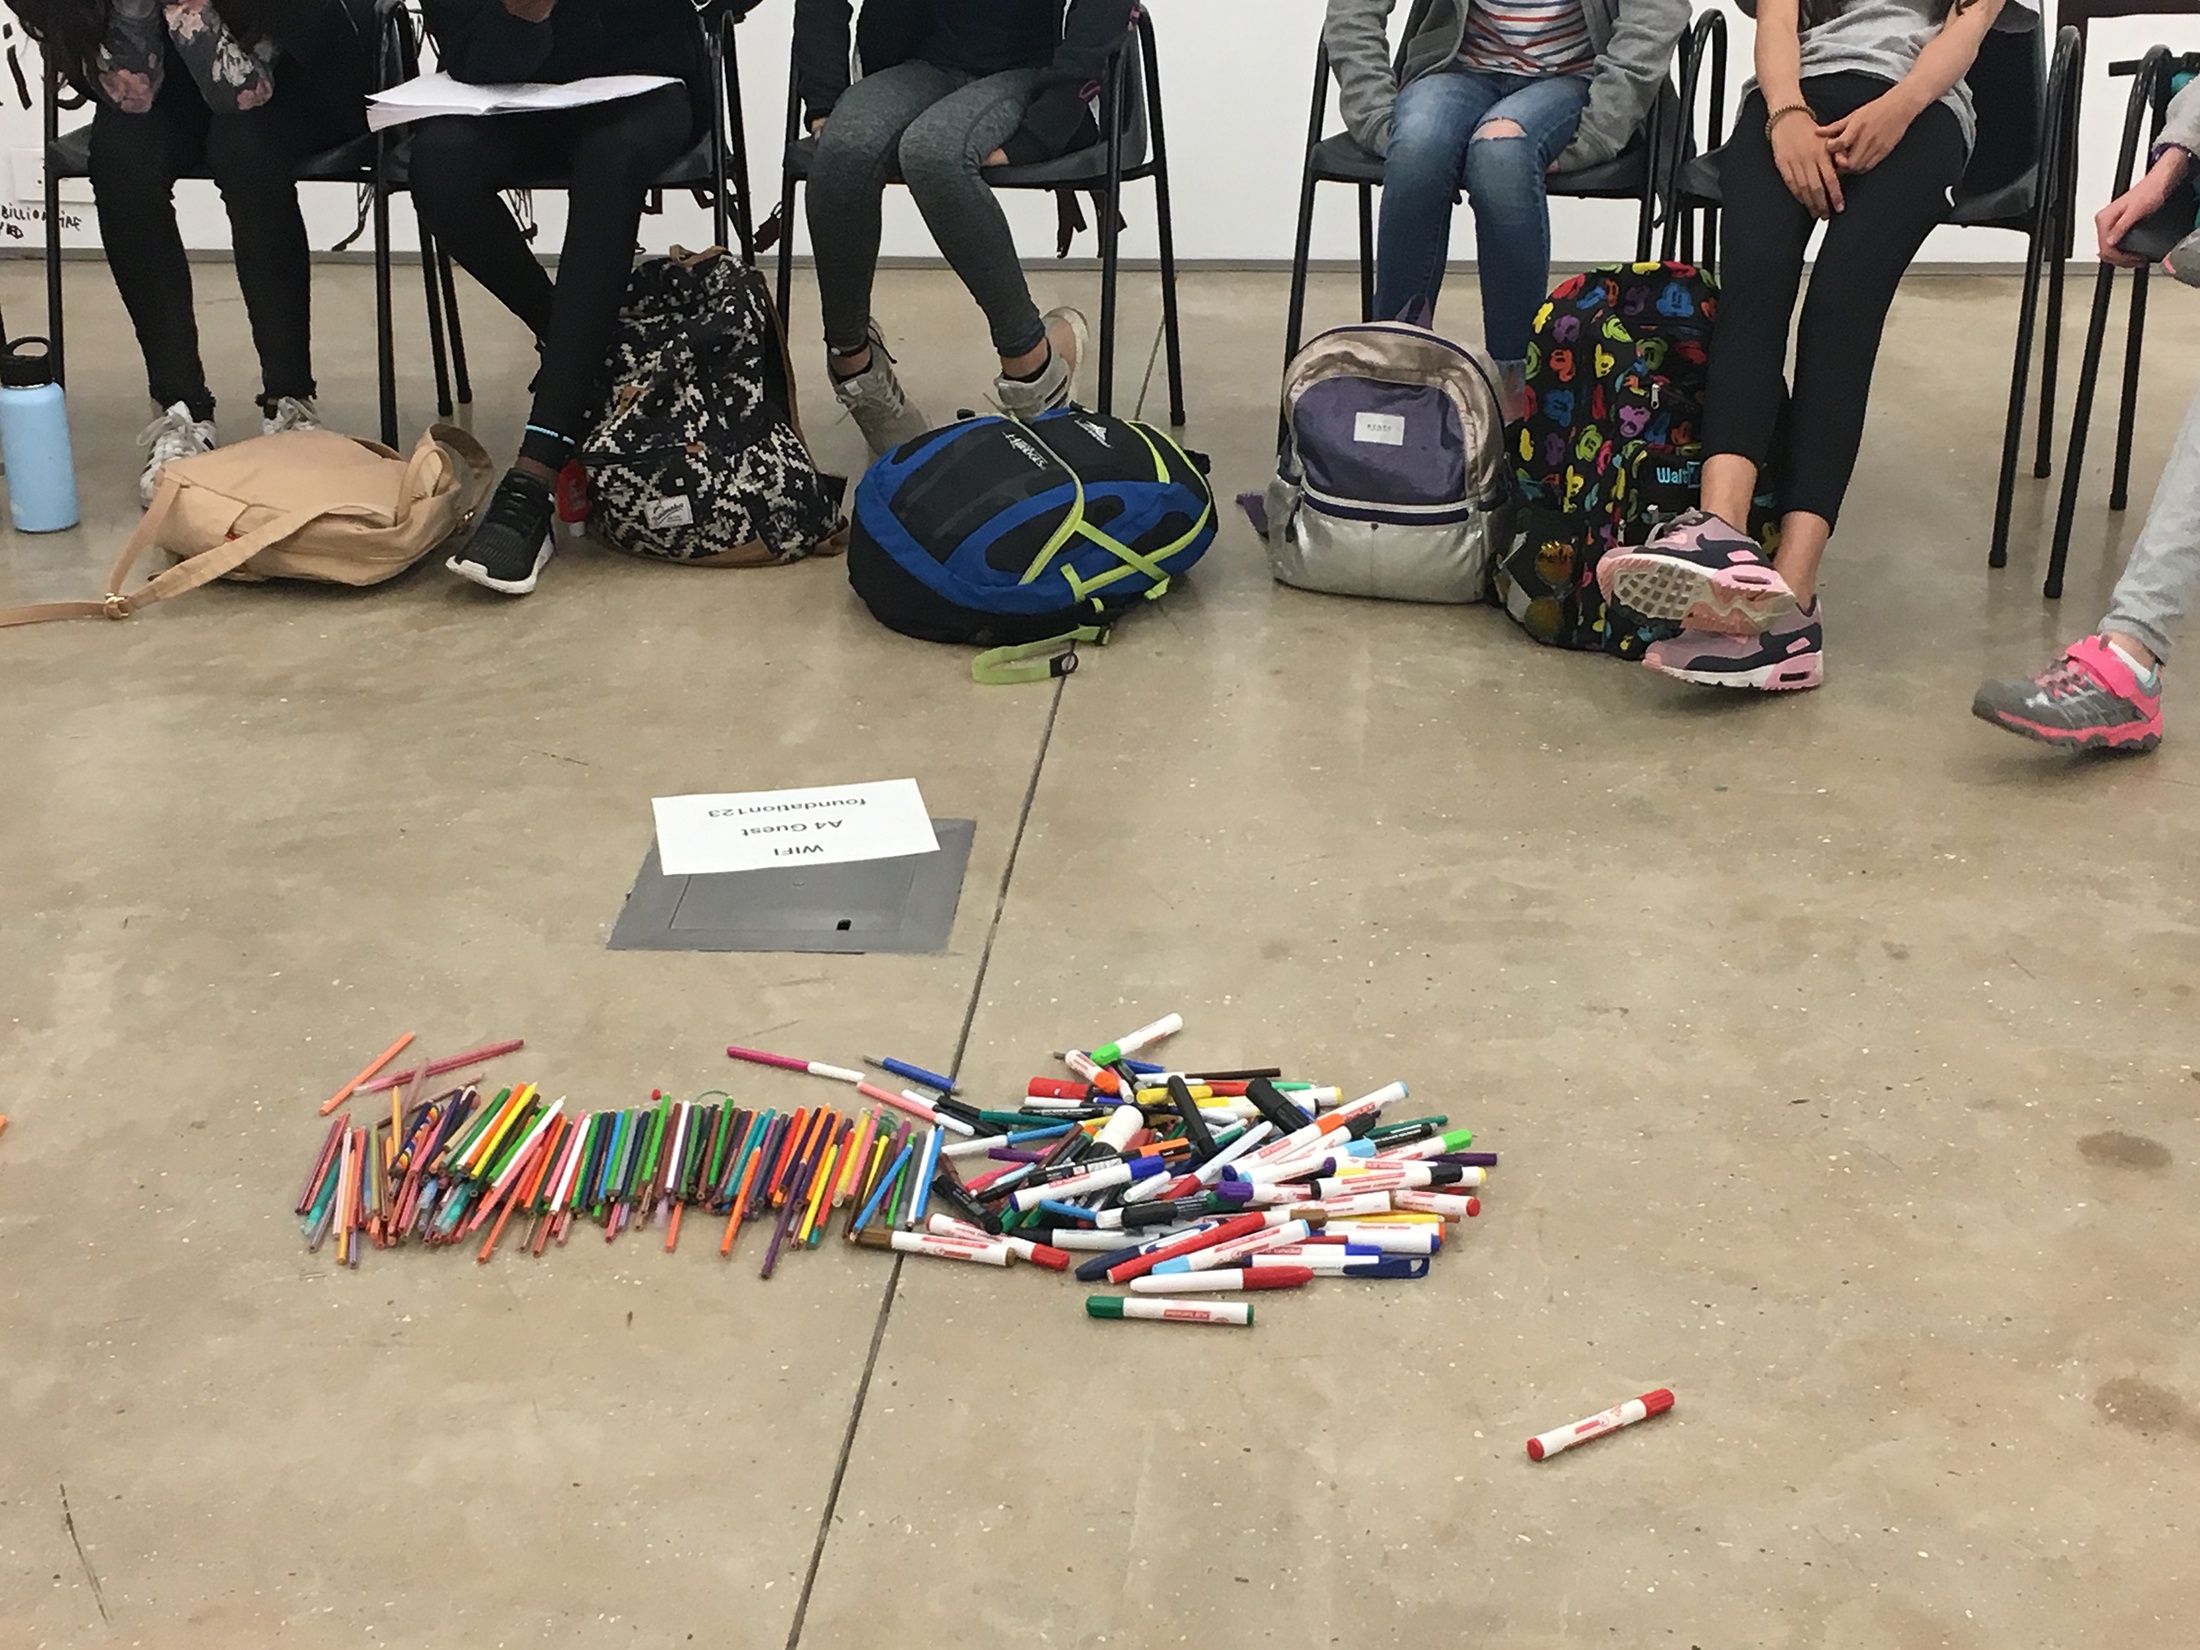 Photograph from the ‘Water Workshop with Edu Africa’ exchange in A4’s Gallery. At the front, a pile of colour pencils and markers are on the floor. At the back, young students from the Avenues World School are seated on chairs.
